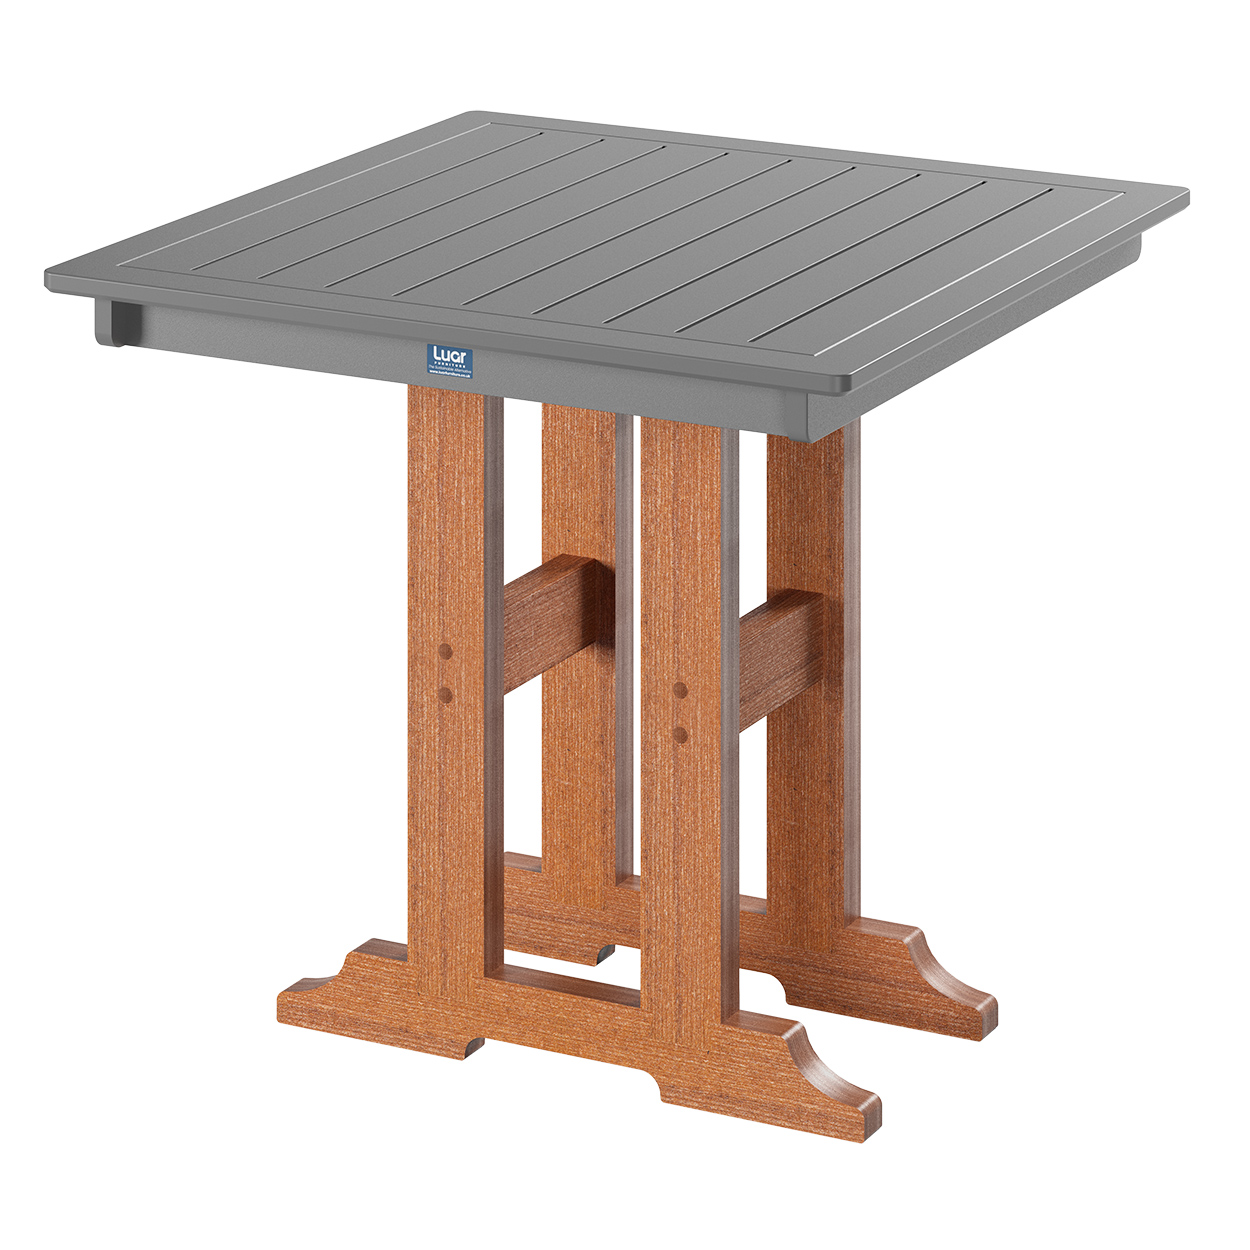 The Cranage Dining Chat Table